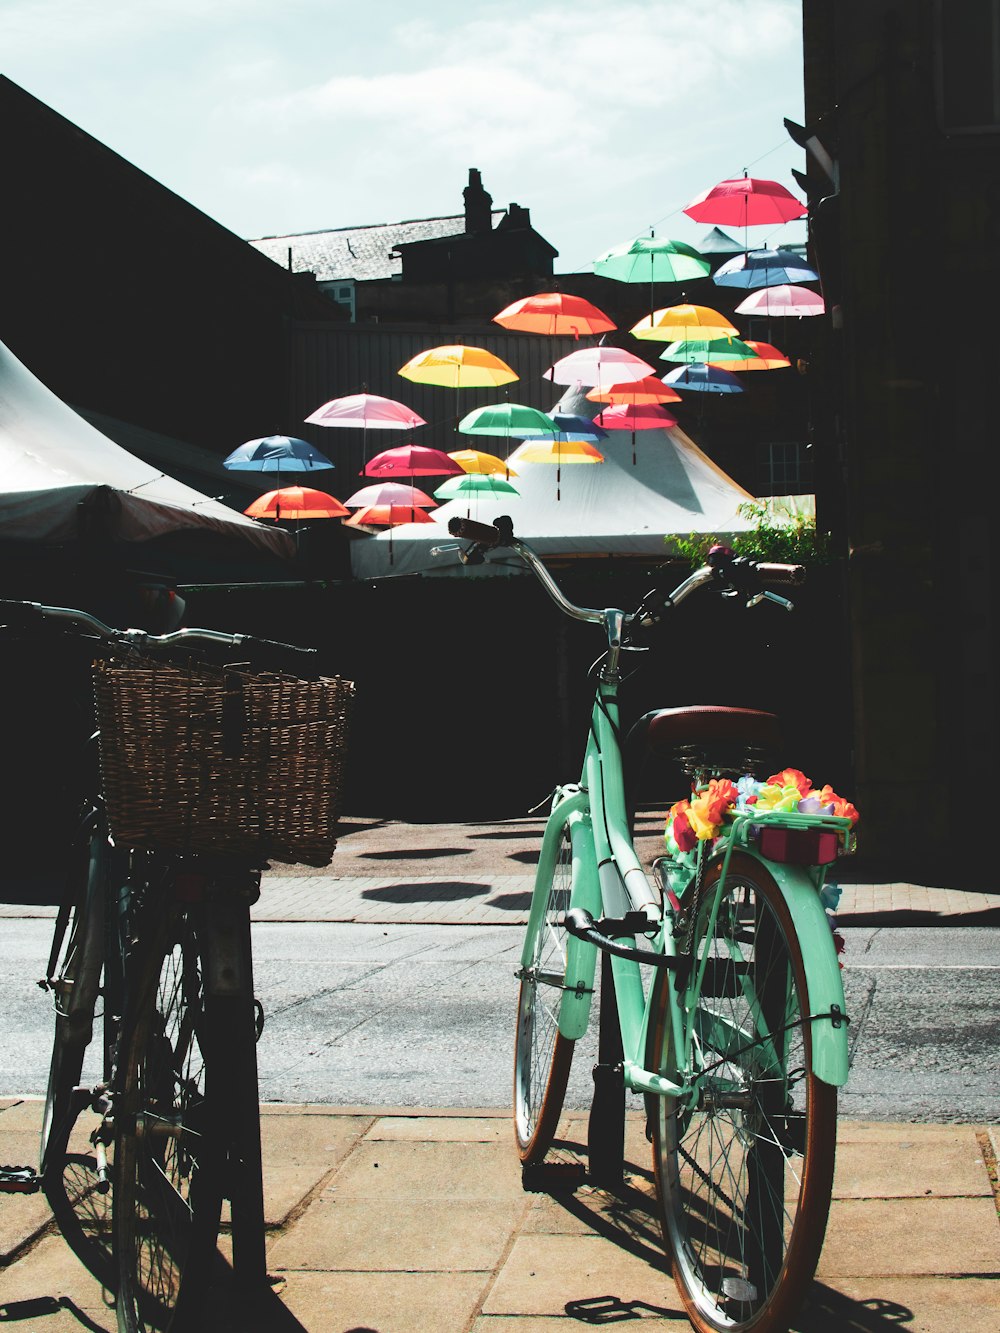 green bicycle with umbrella on the street during daytime